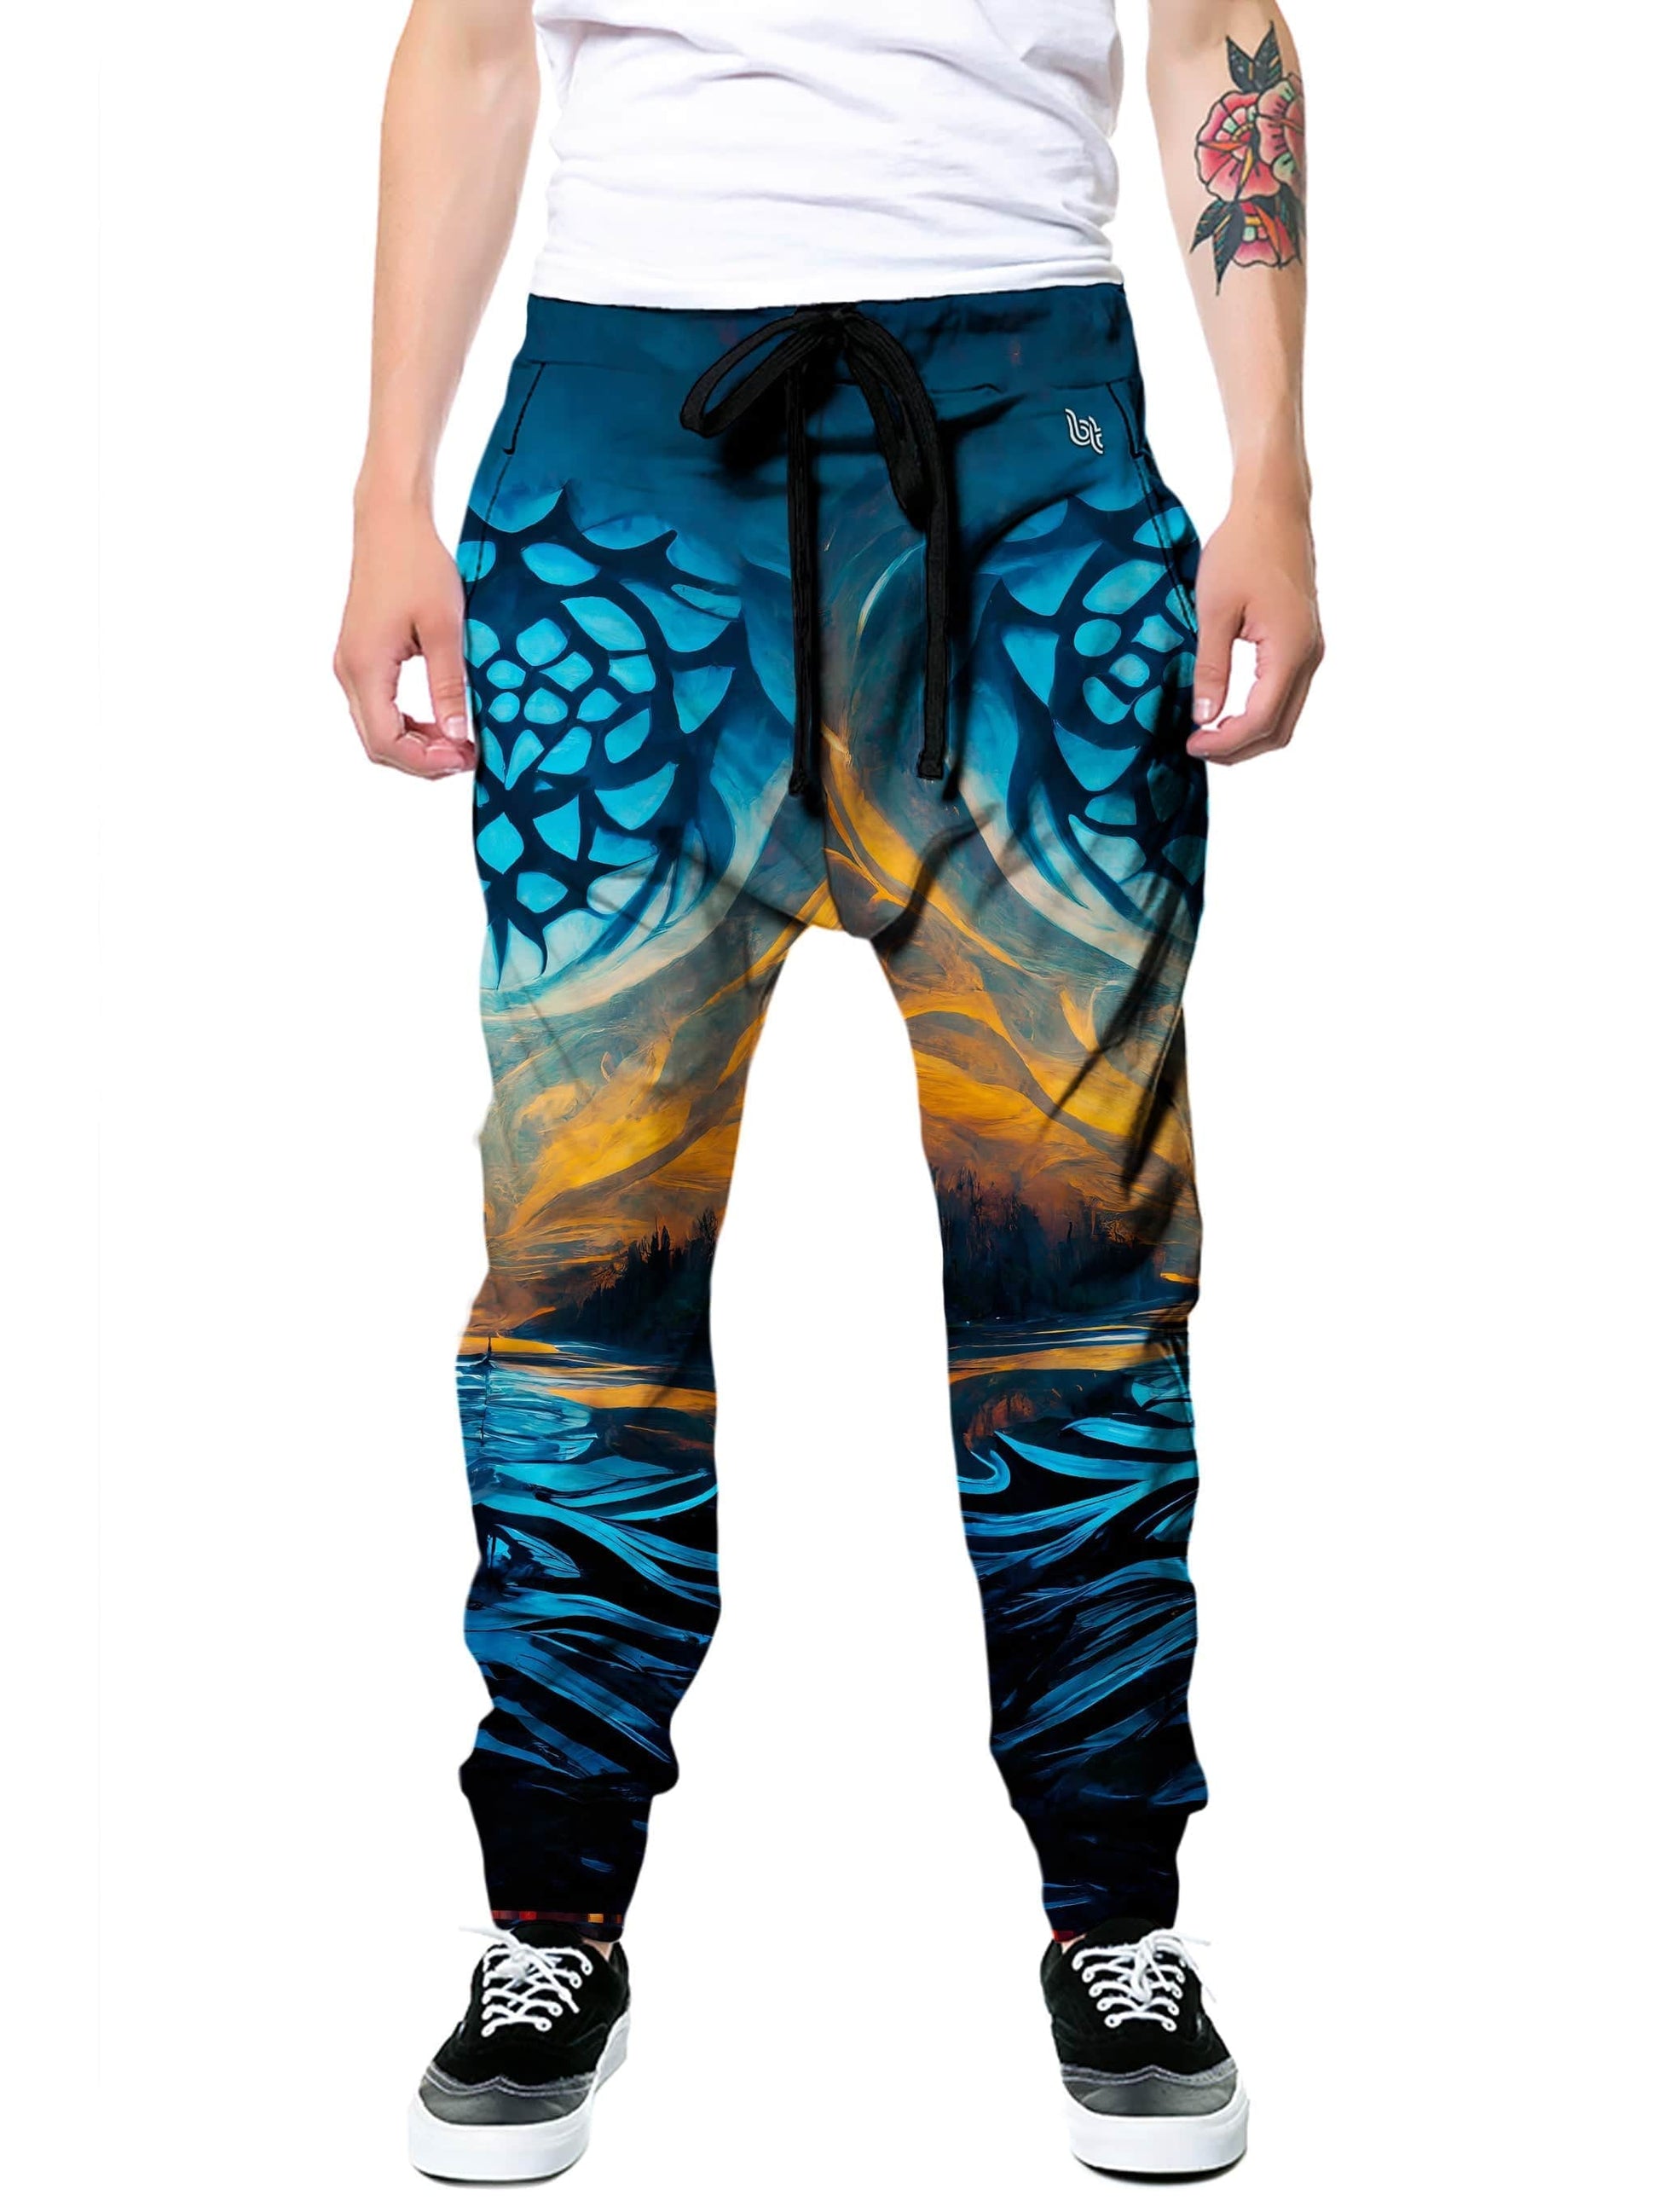 Auspicious Aftermath Joggers, Gratefully Dyed, | iEDM